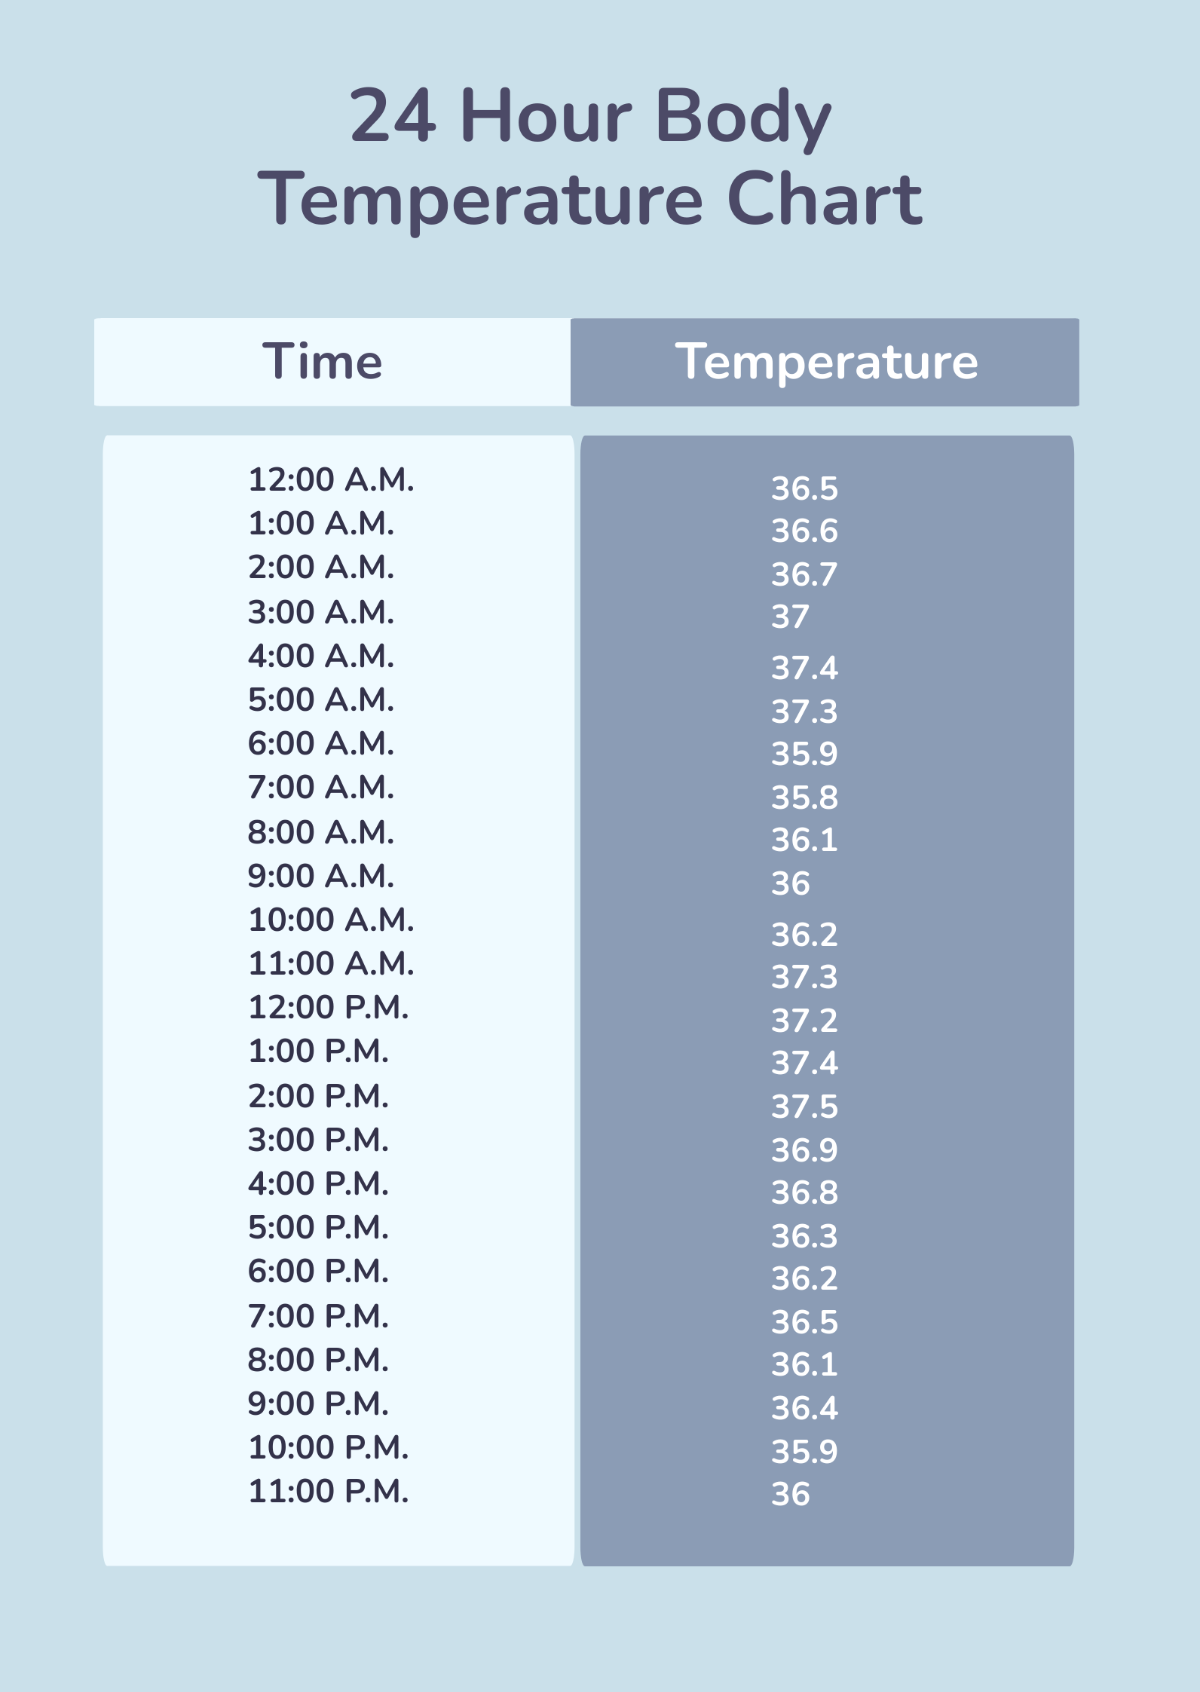 24 Hour Body Temperature Chart